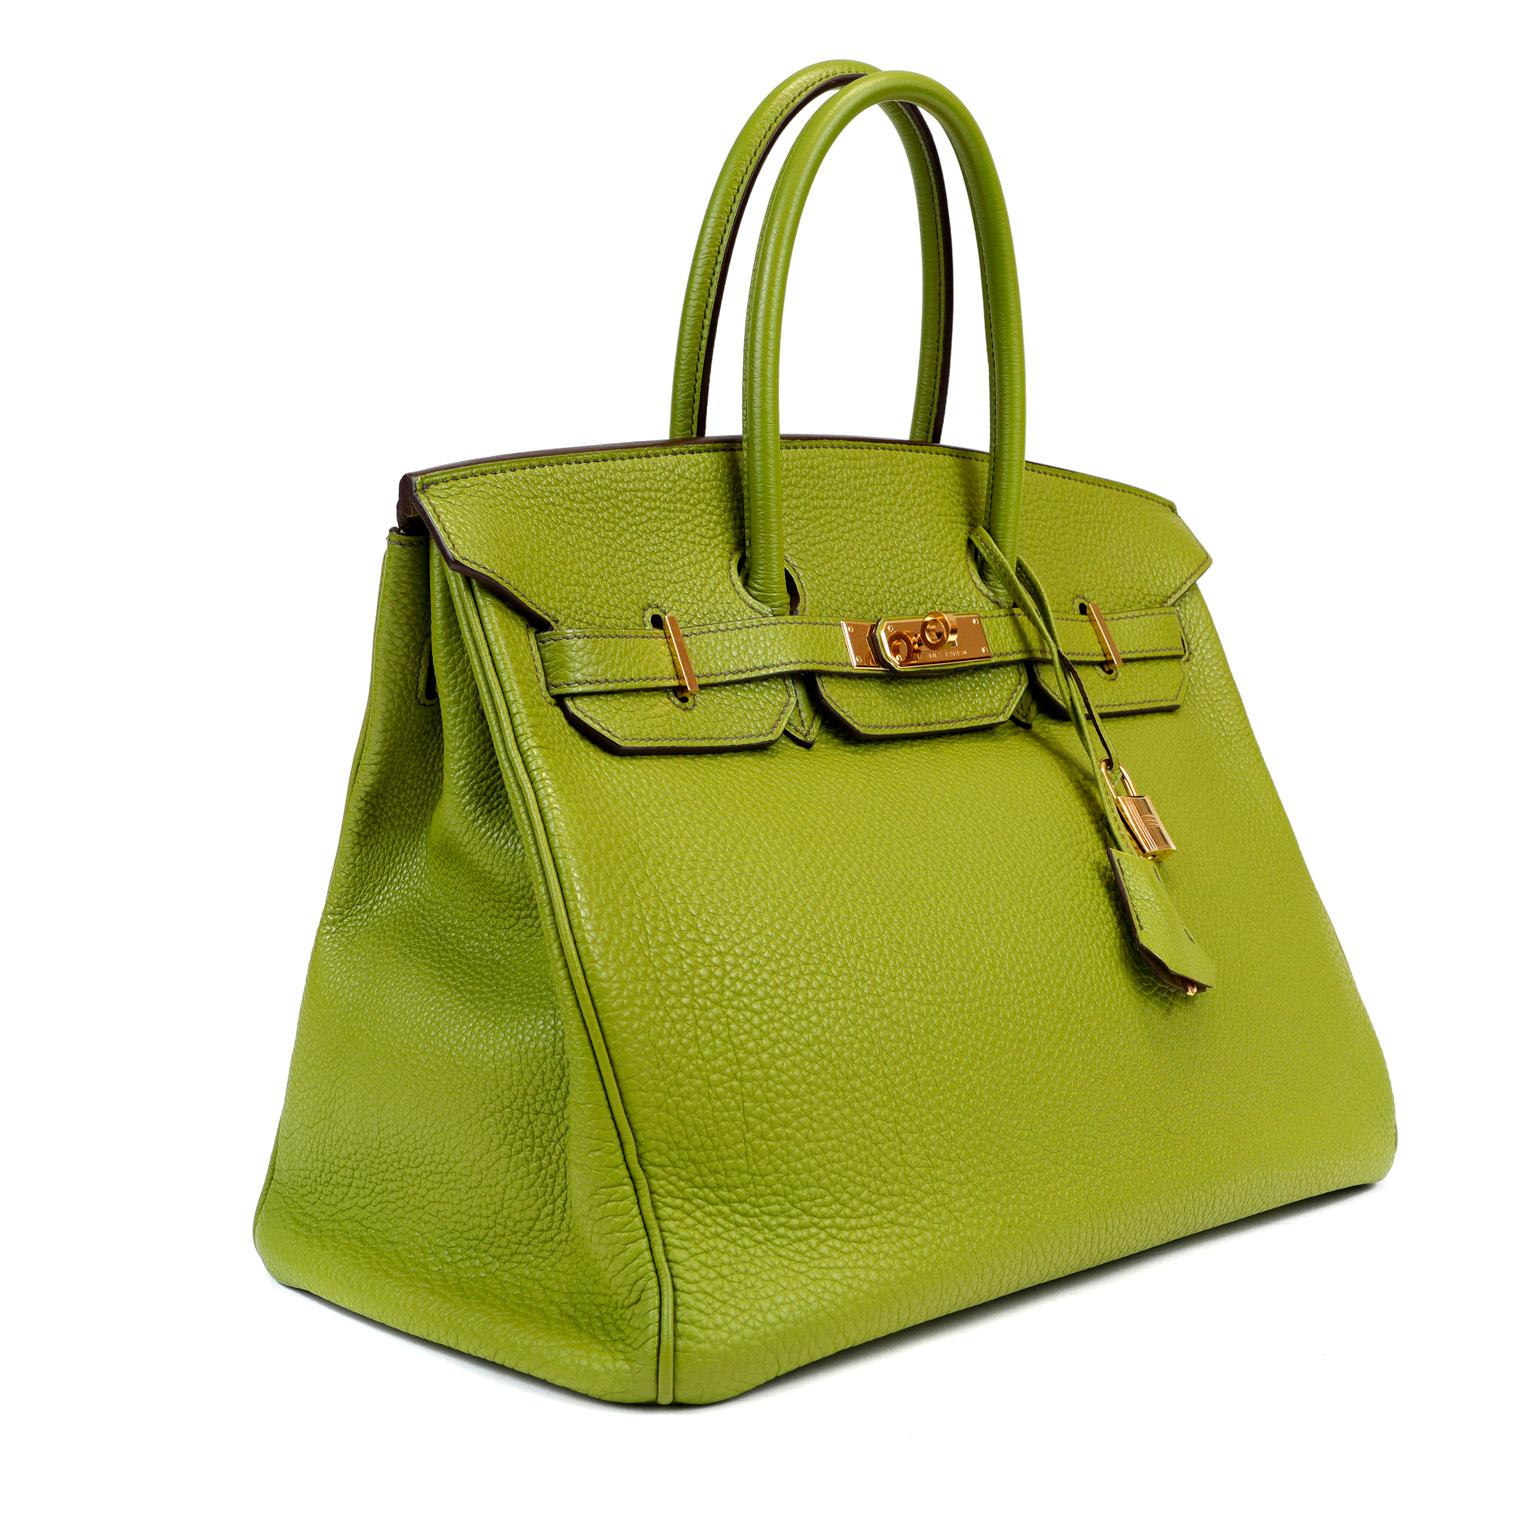 This authentic Hermès Green Togo 35 cm Birkin is in excellent condition. Hand stitched by skilled craftsmen, wait lists of a year or more are common for the Hermès Birkin. Glorious Granny apple green paired with gold hardware is a brilliant pop of